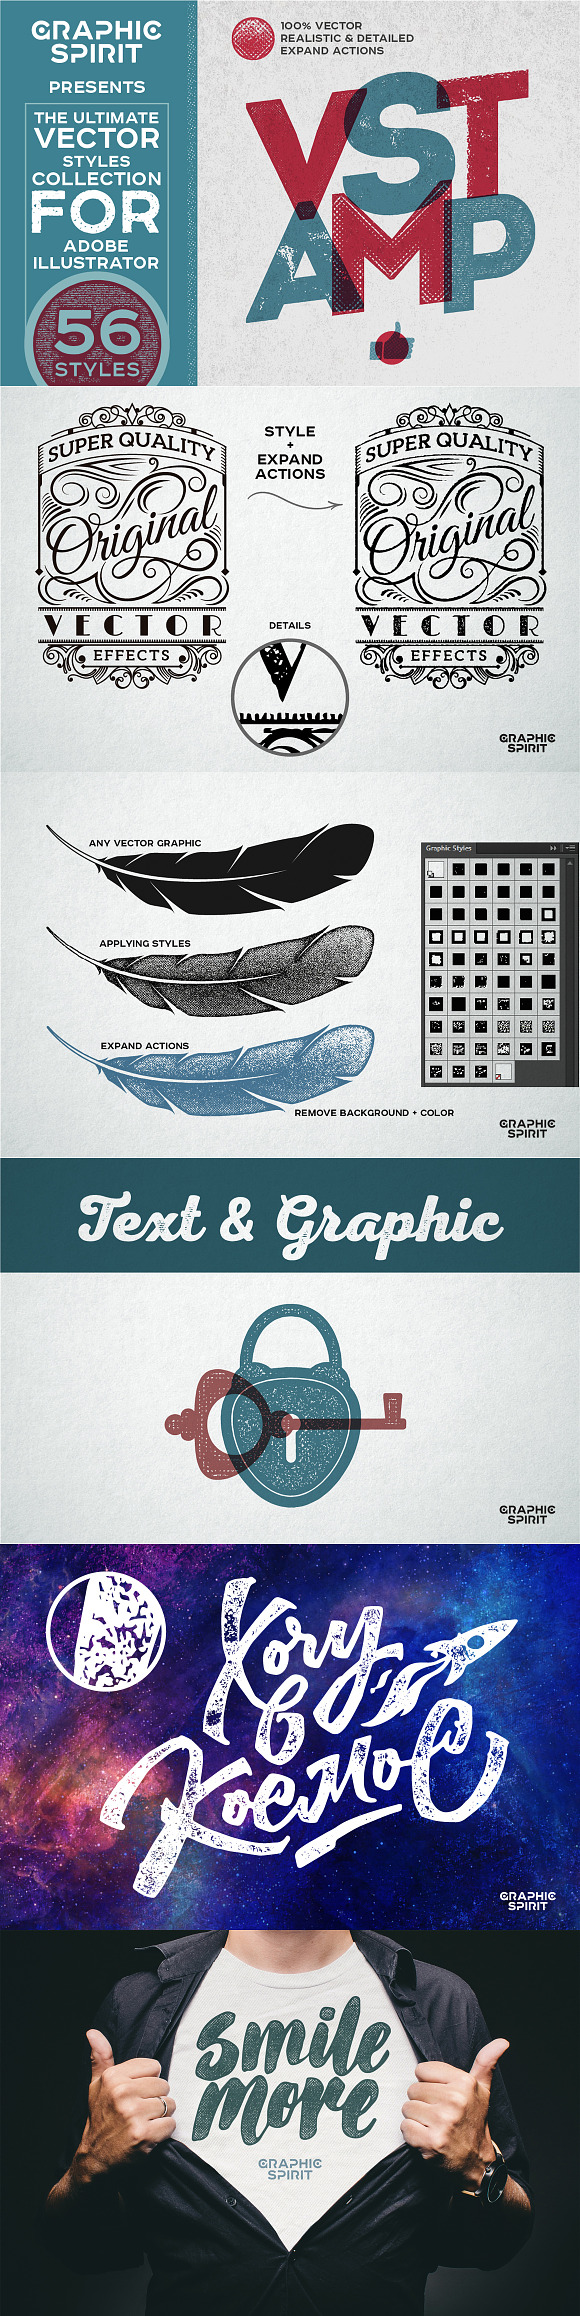 12 in 1 ILLUSTRATOR Bundle DISCOUNT in Photoshop Layer Styles - product preview 2